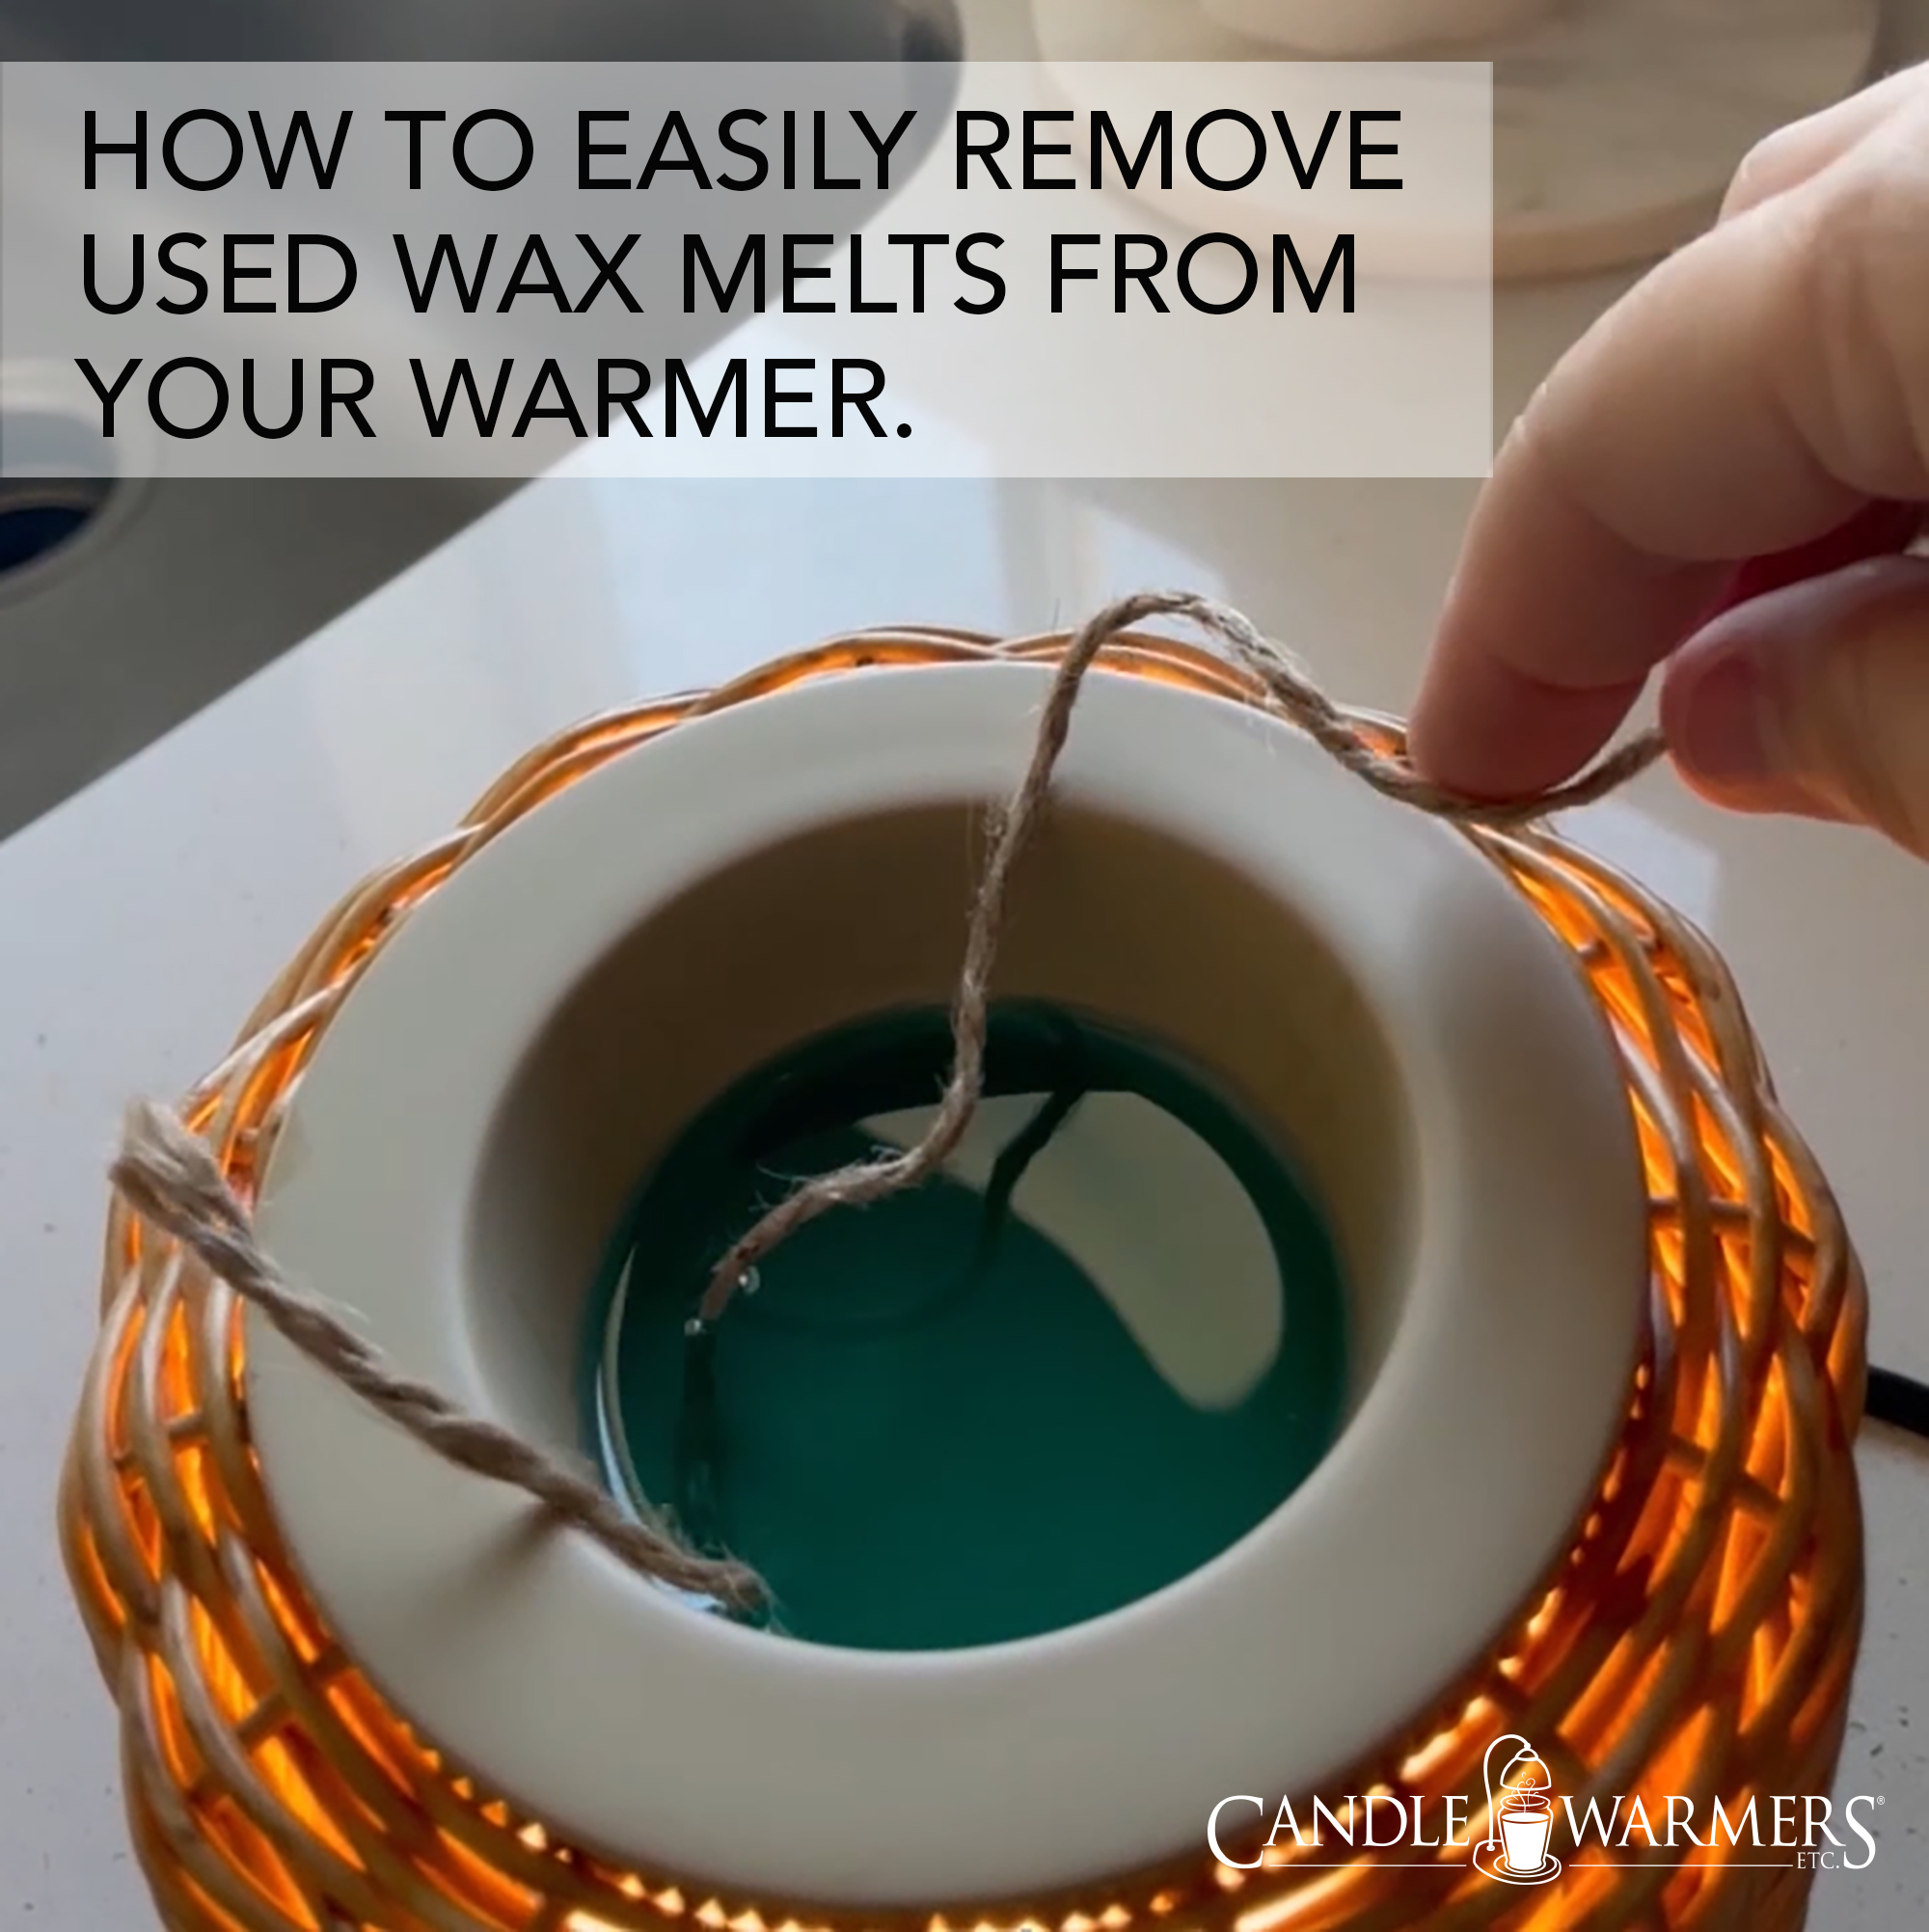 https://www.candlewarmers.com/wp-content/uploads/2022/06/How-to-easily-remove-used-wax-melts-from-your-warmer.jpg